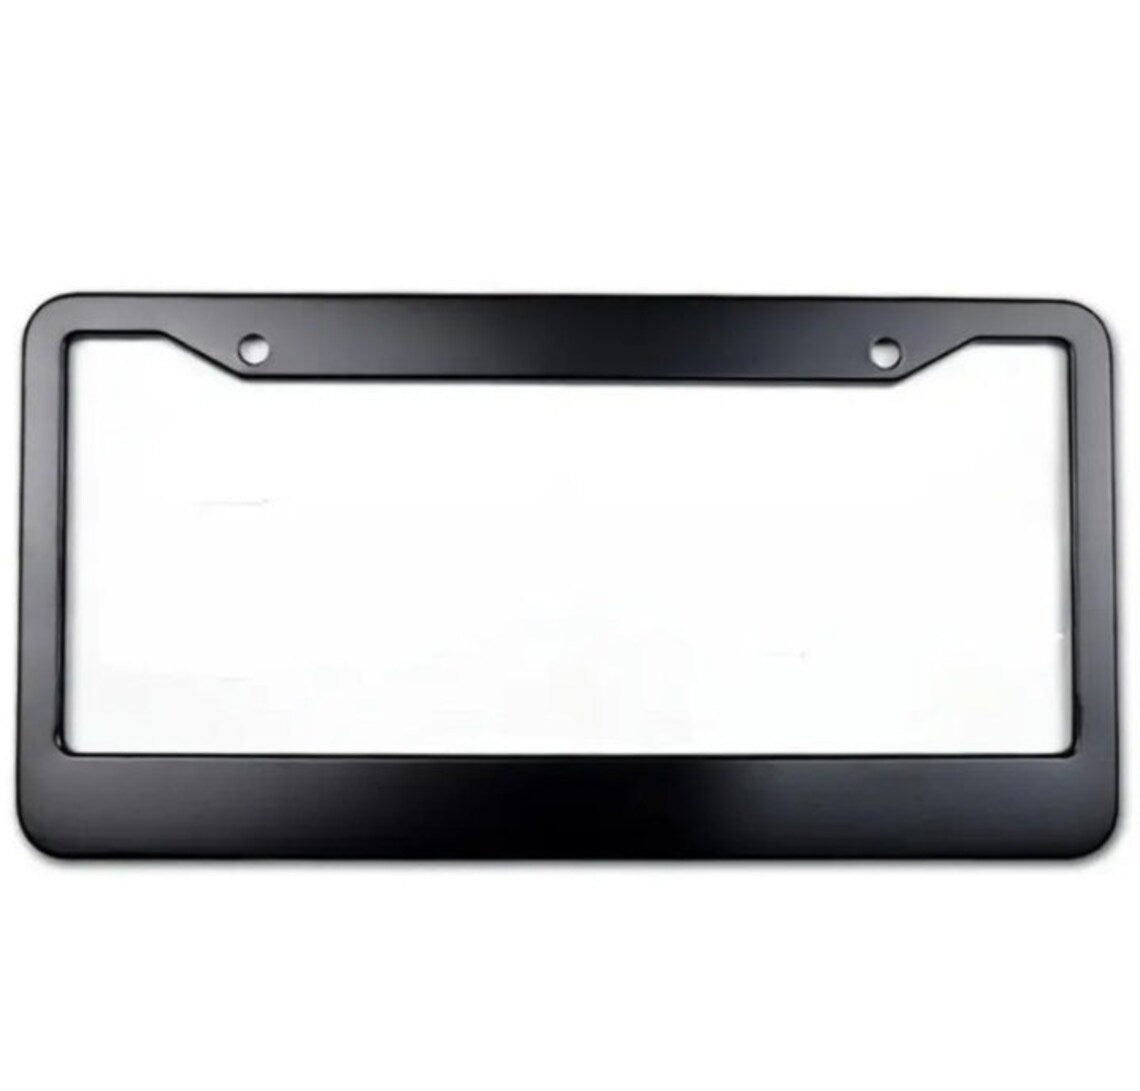 Yield to The Princess Black Plastic or Aluminum License Plate Frame Truck Car Van Décor Car Accessories Car Gifts Holder Funny Auto Parts